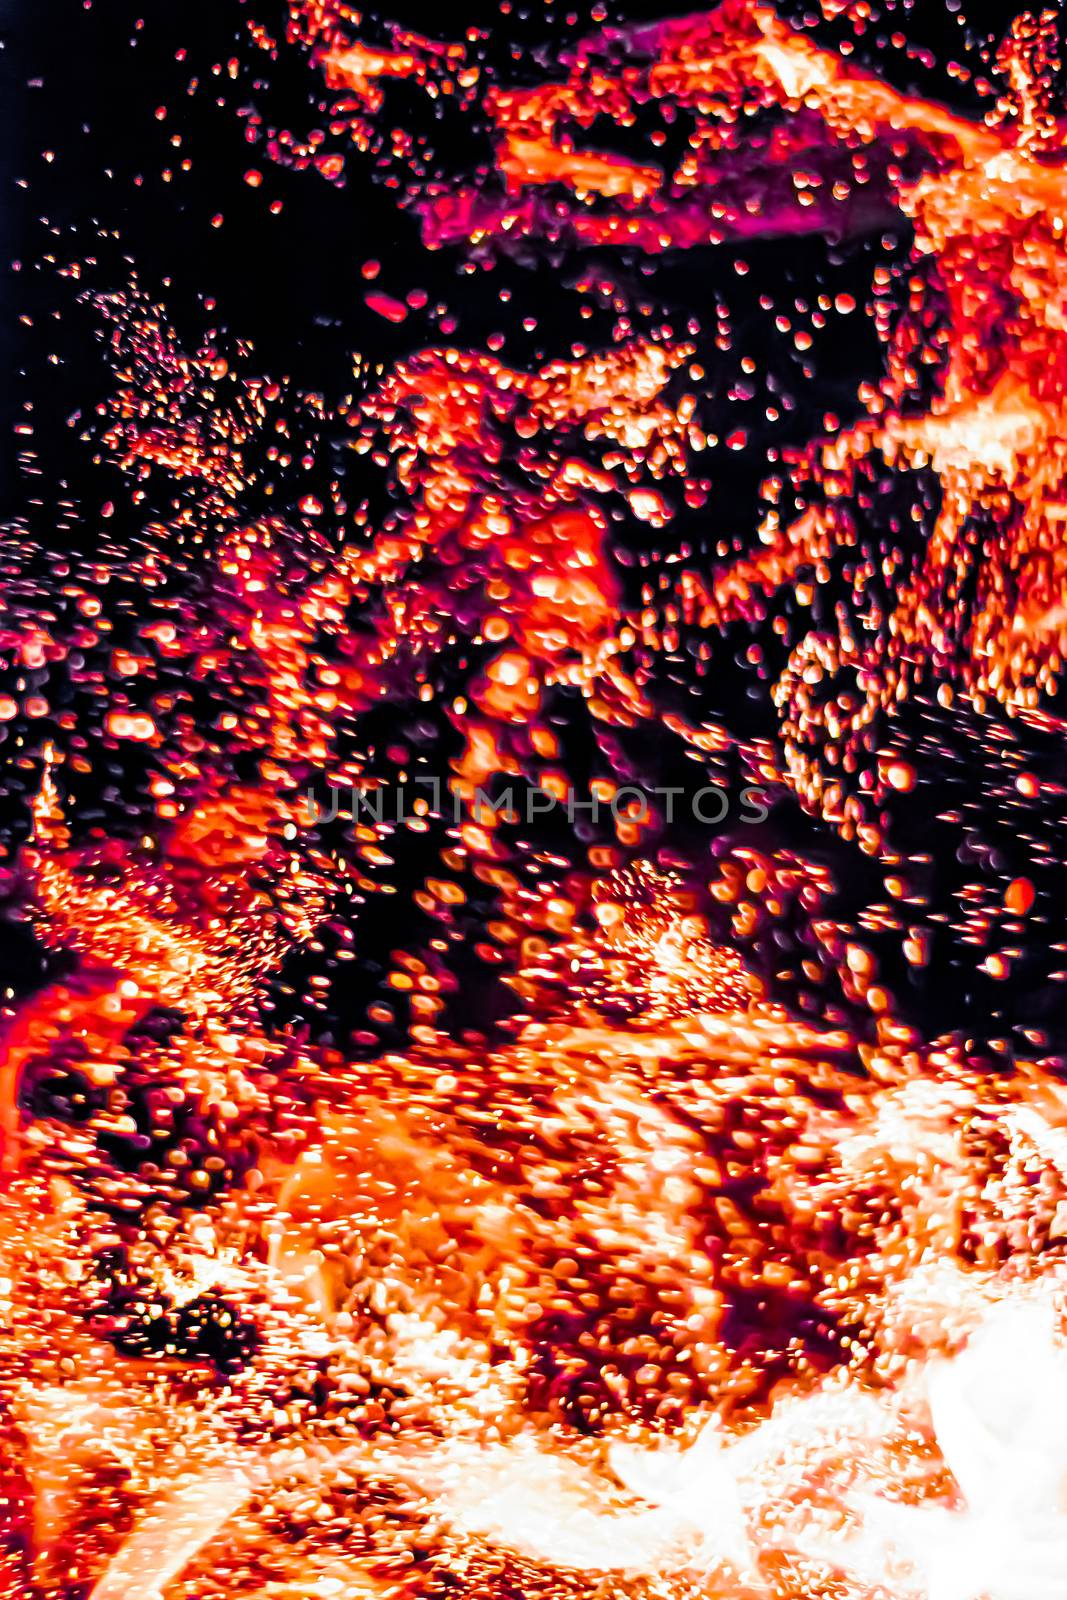 Red fire flames as nature element and abstract background, minimal design